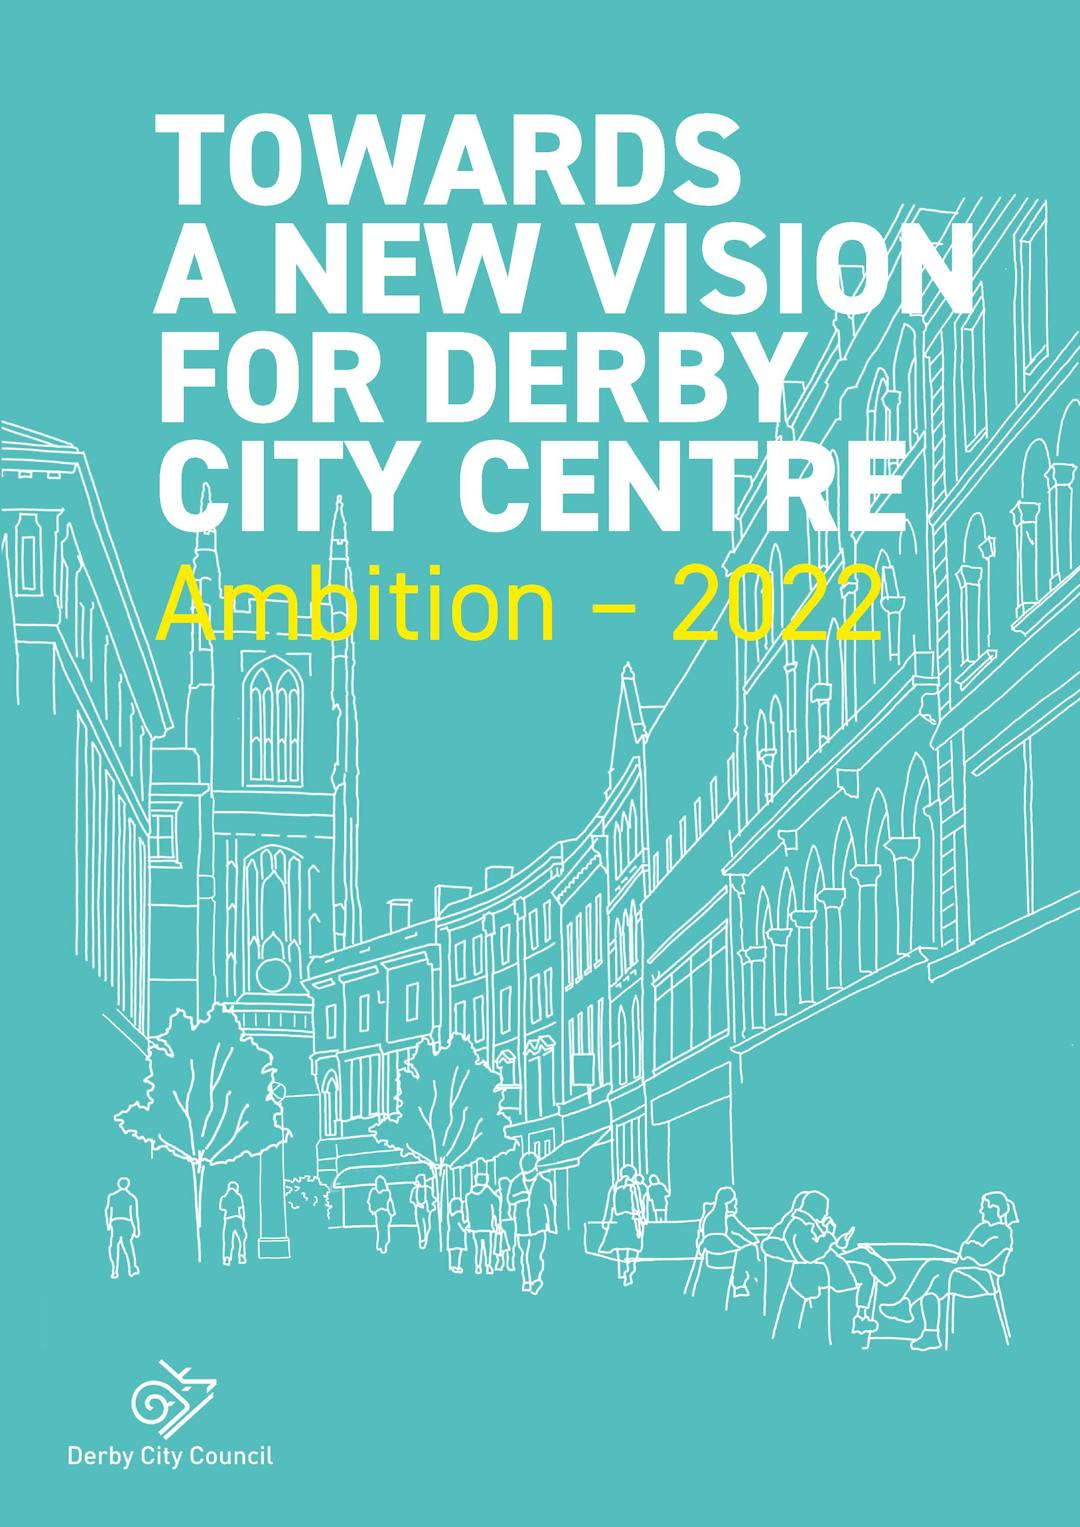 Image showing the front cover of the Towards a New Vision document